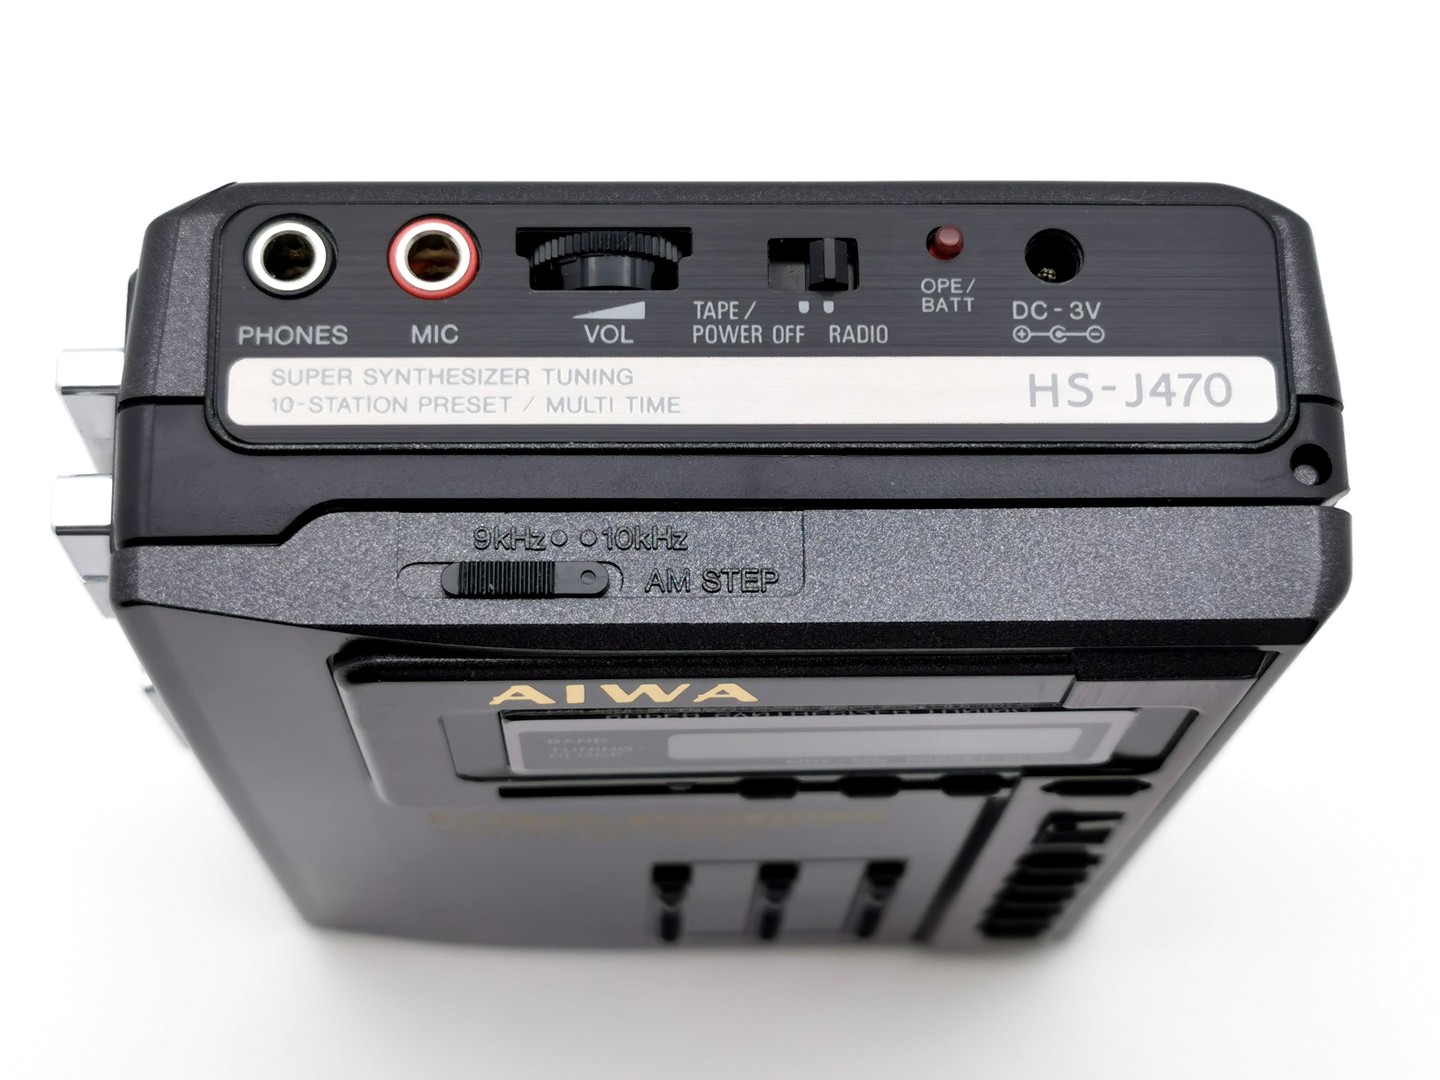 Aiwa_HS-J470_-_Top_front_angled_upright_with_controls_and_jacks_ig-boxedwalkman